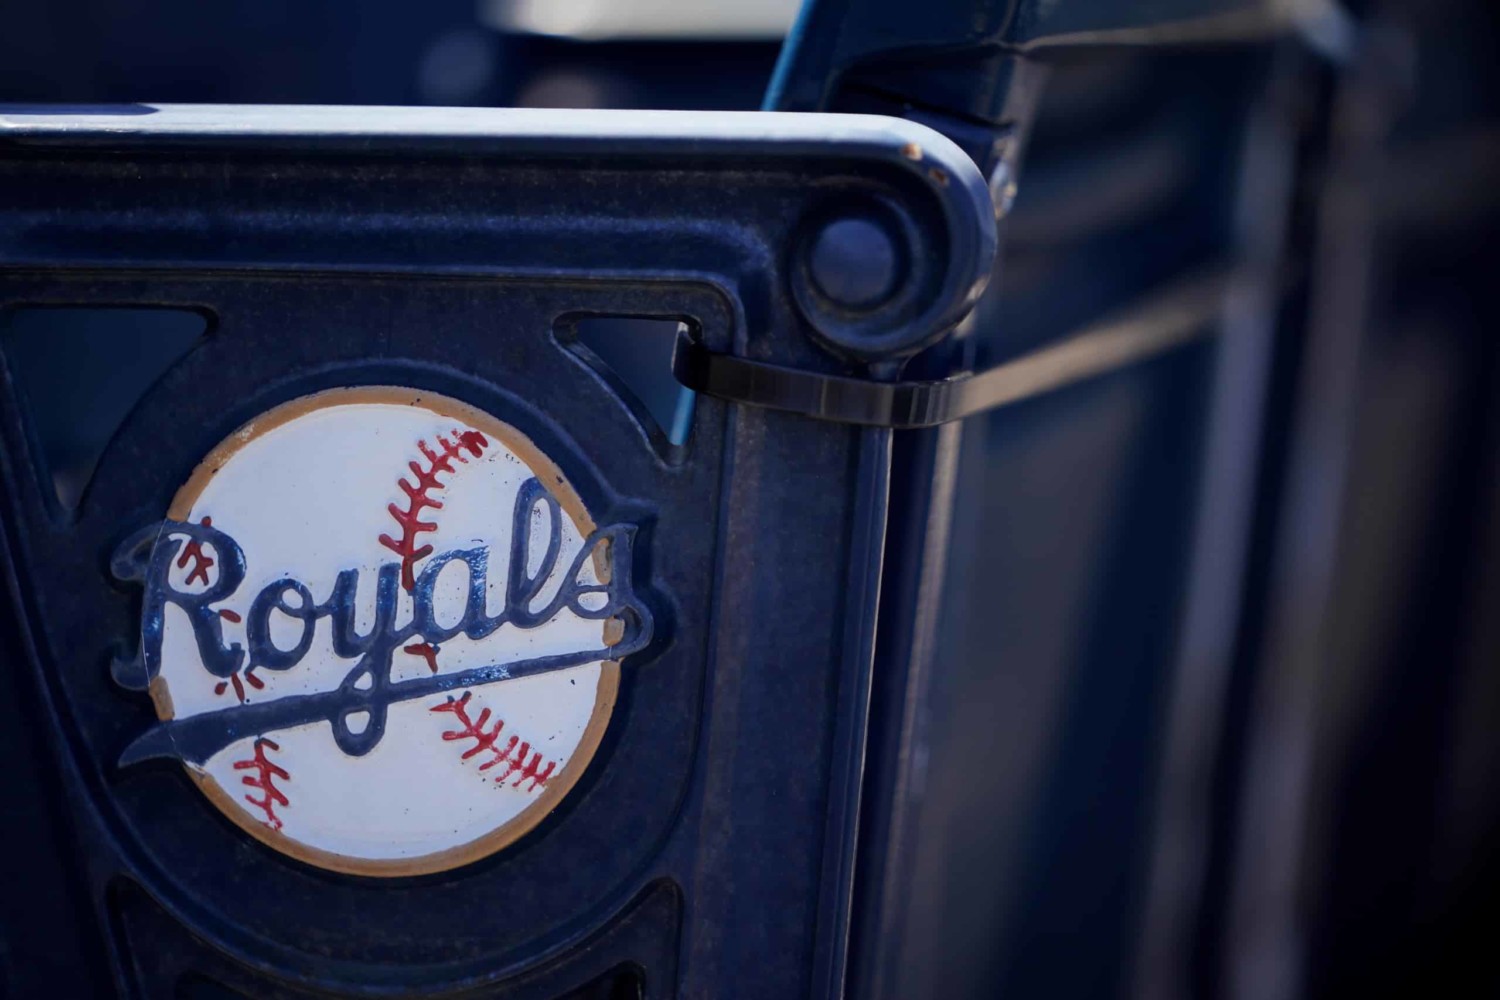 Kansas City Royals logo on chairs in ball park